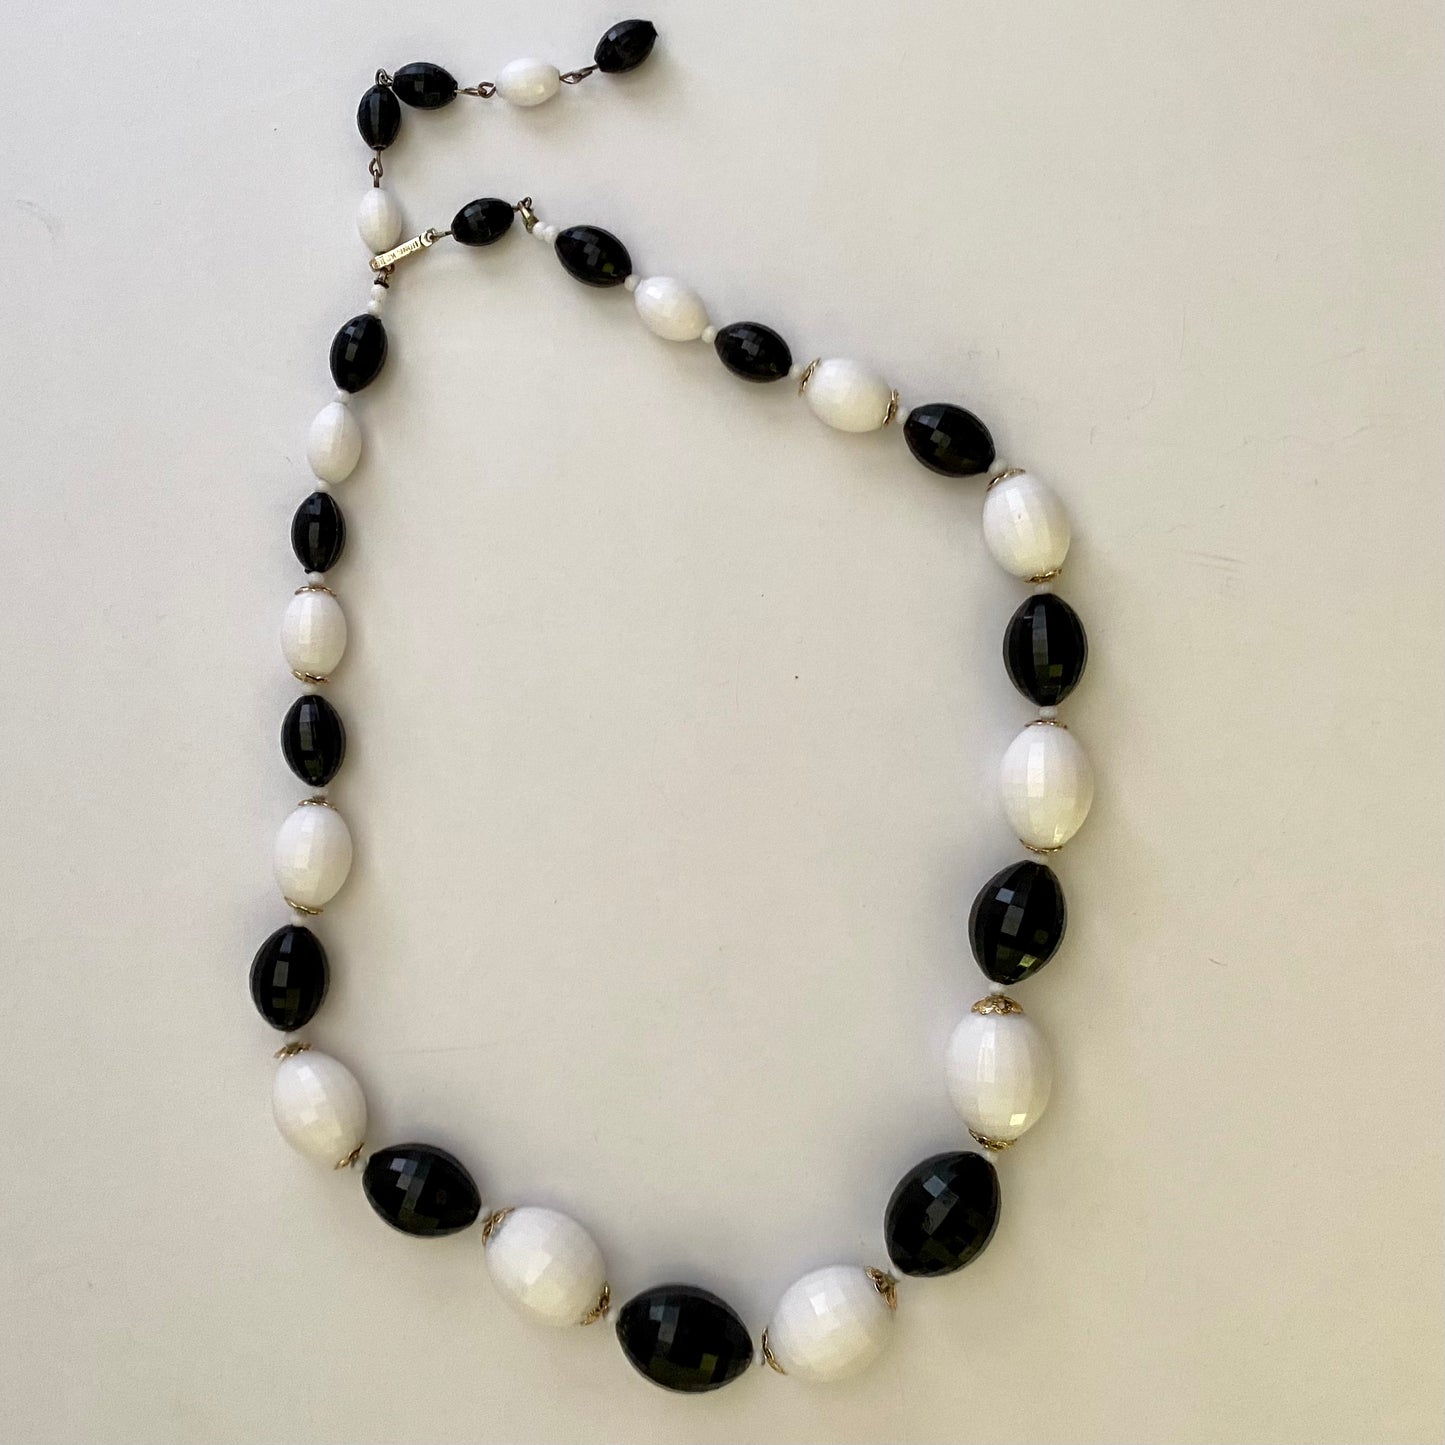 1960s Hong Kong Black & White Oval Bead Necklace